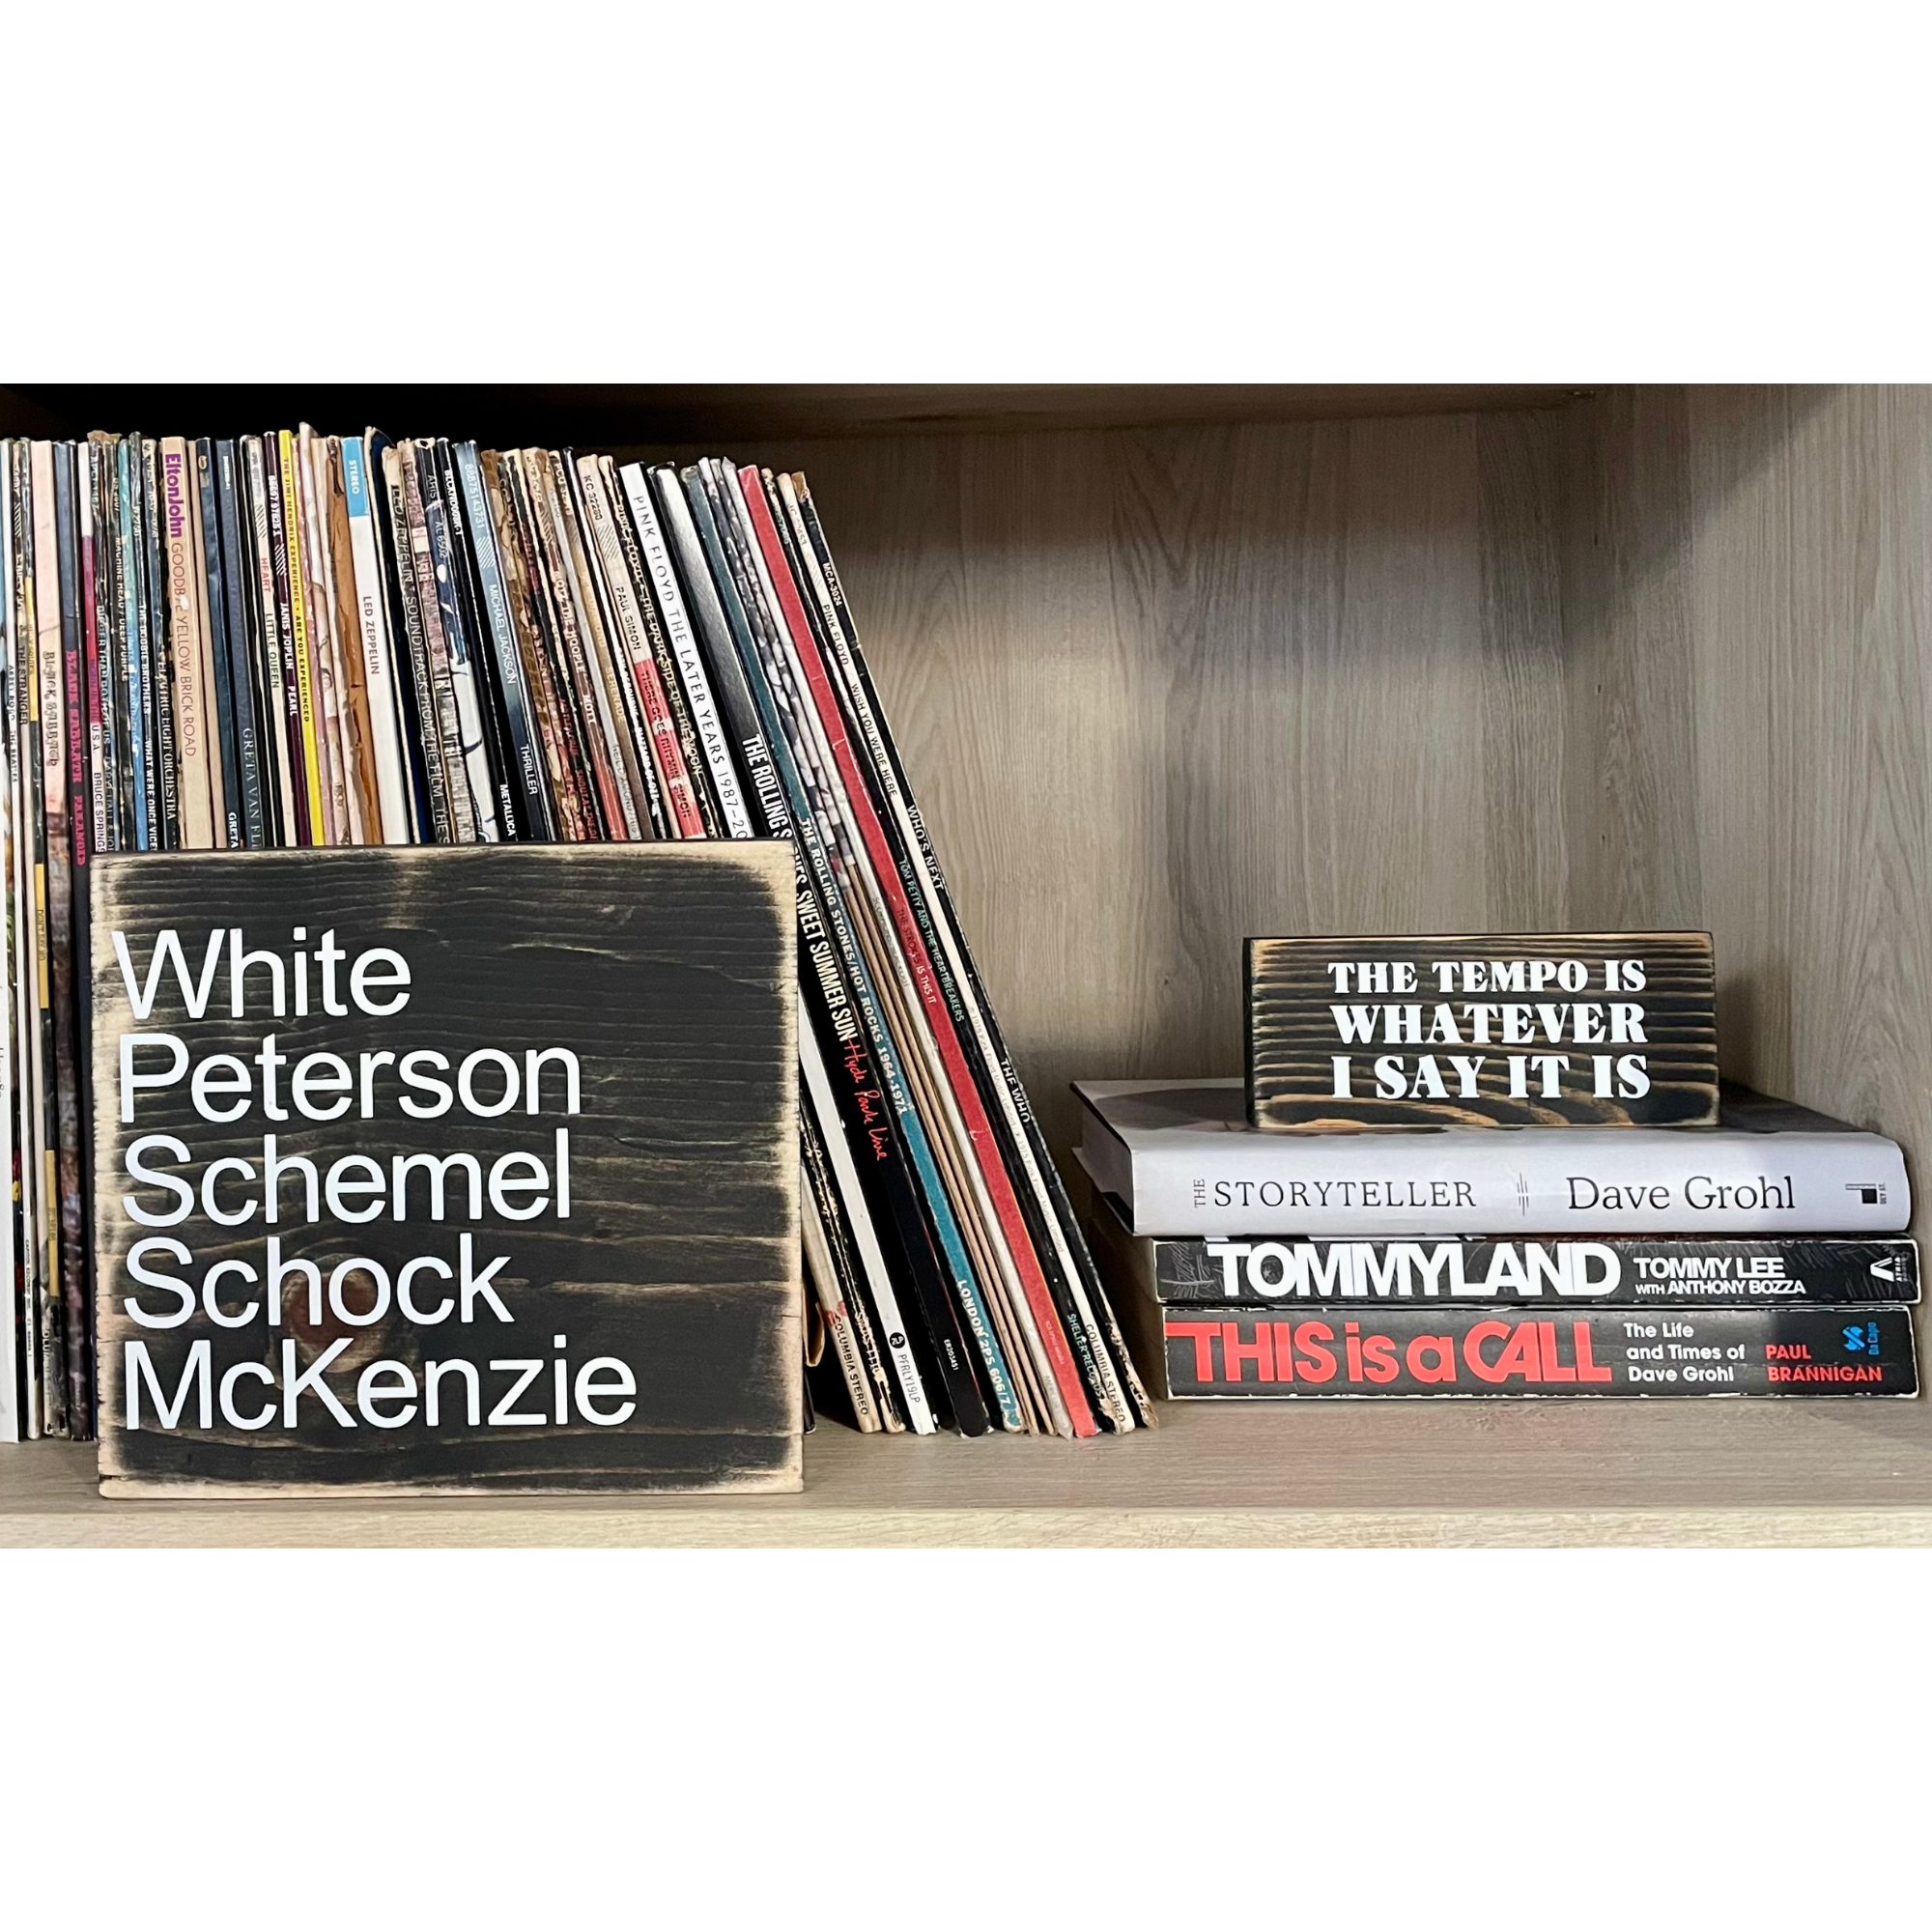 Two black, wood signs sit in a bookcase with vinyl records. The larger sign reads in white "White Peterson Schemel Schock McKenzie" The smaller sign reads, "THE TEMPO IS WHATEVER I SAY IT IS"